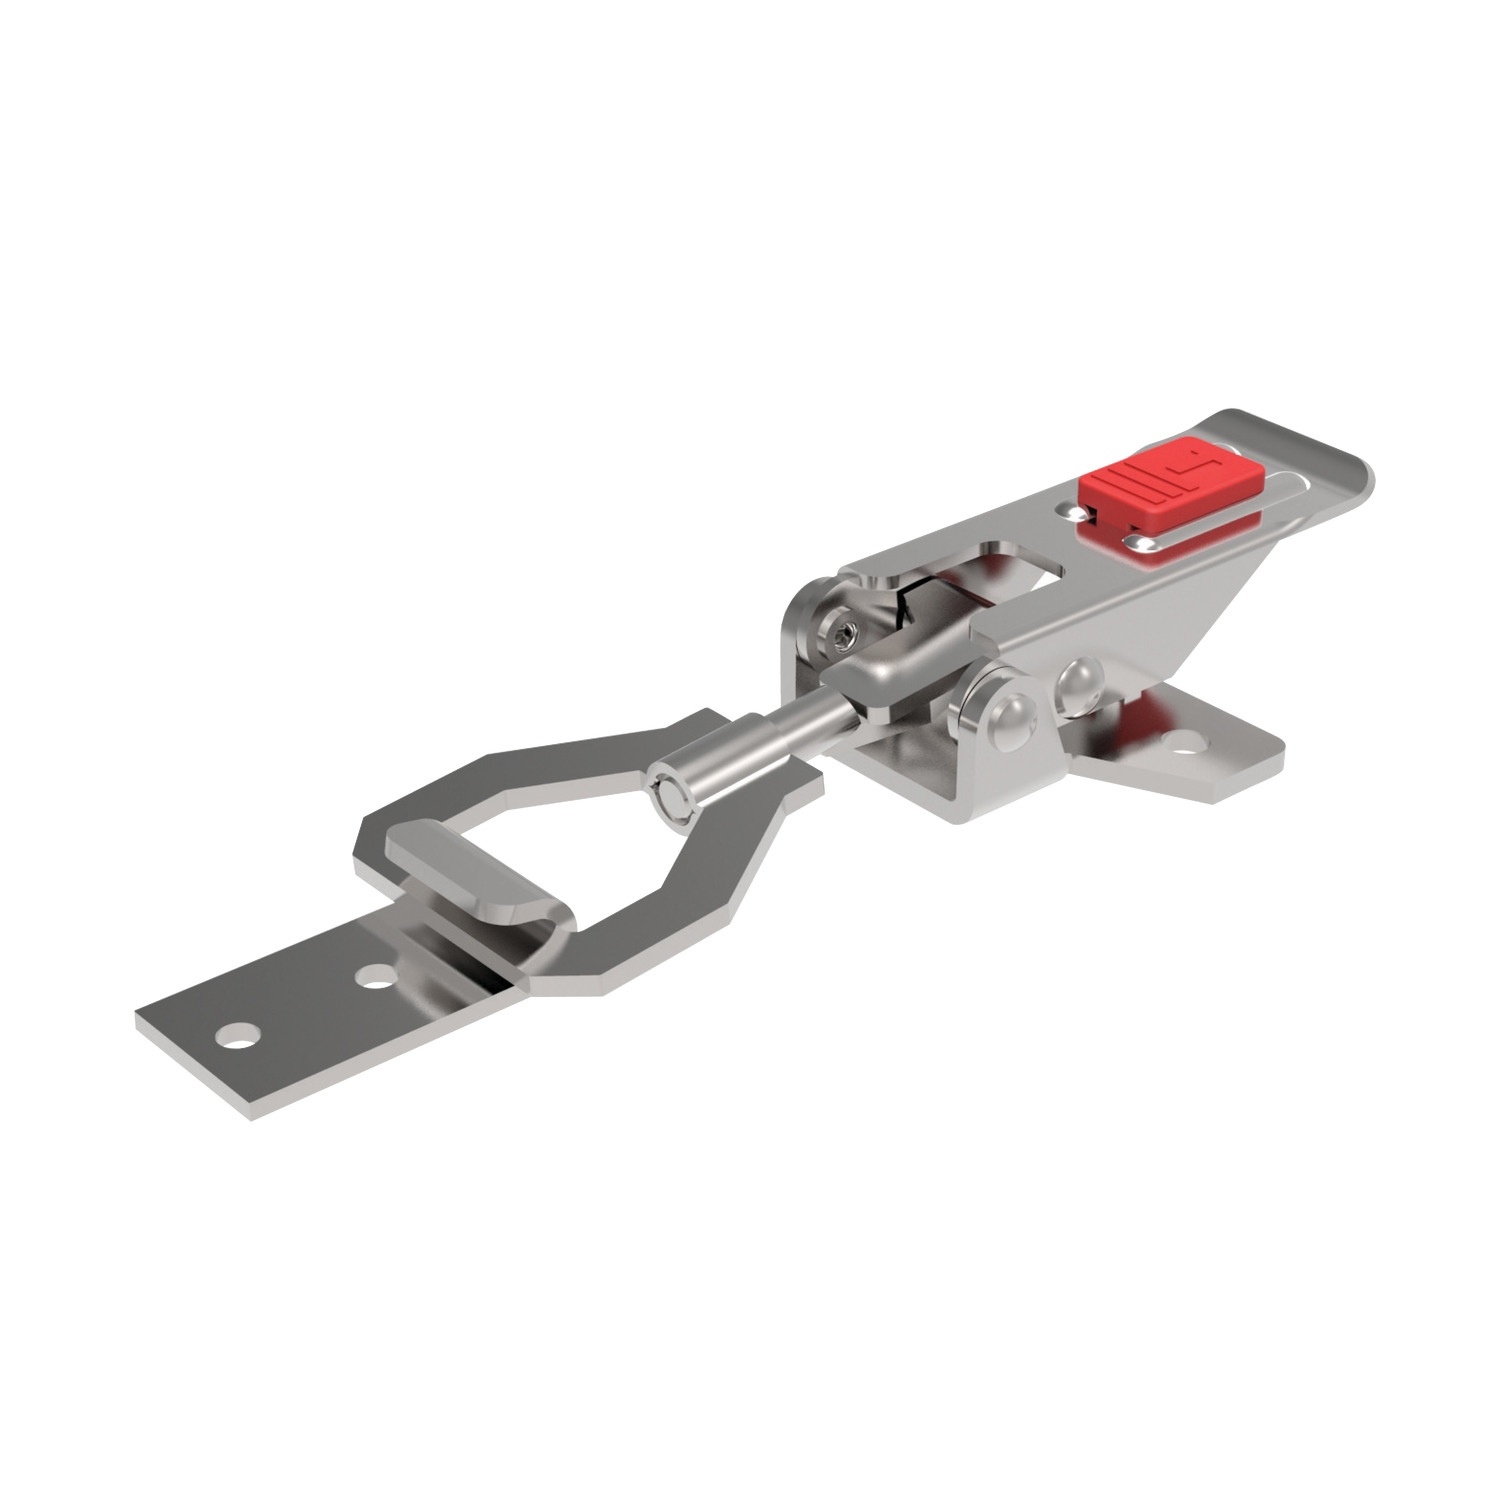 Toggle Latches Toggle latches with adjustable secondary lock, available in steel or stainless steel. Draw length adjustable through turns of threaded raw rod for up to 12mm of adjustment.